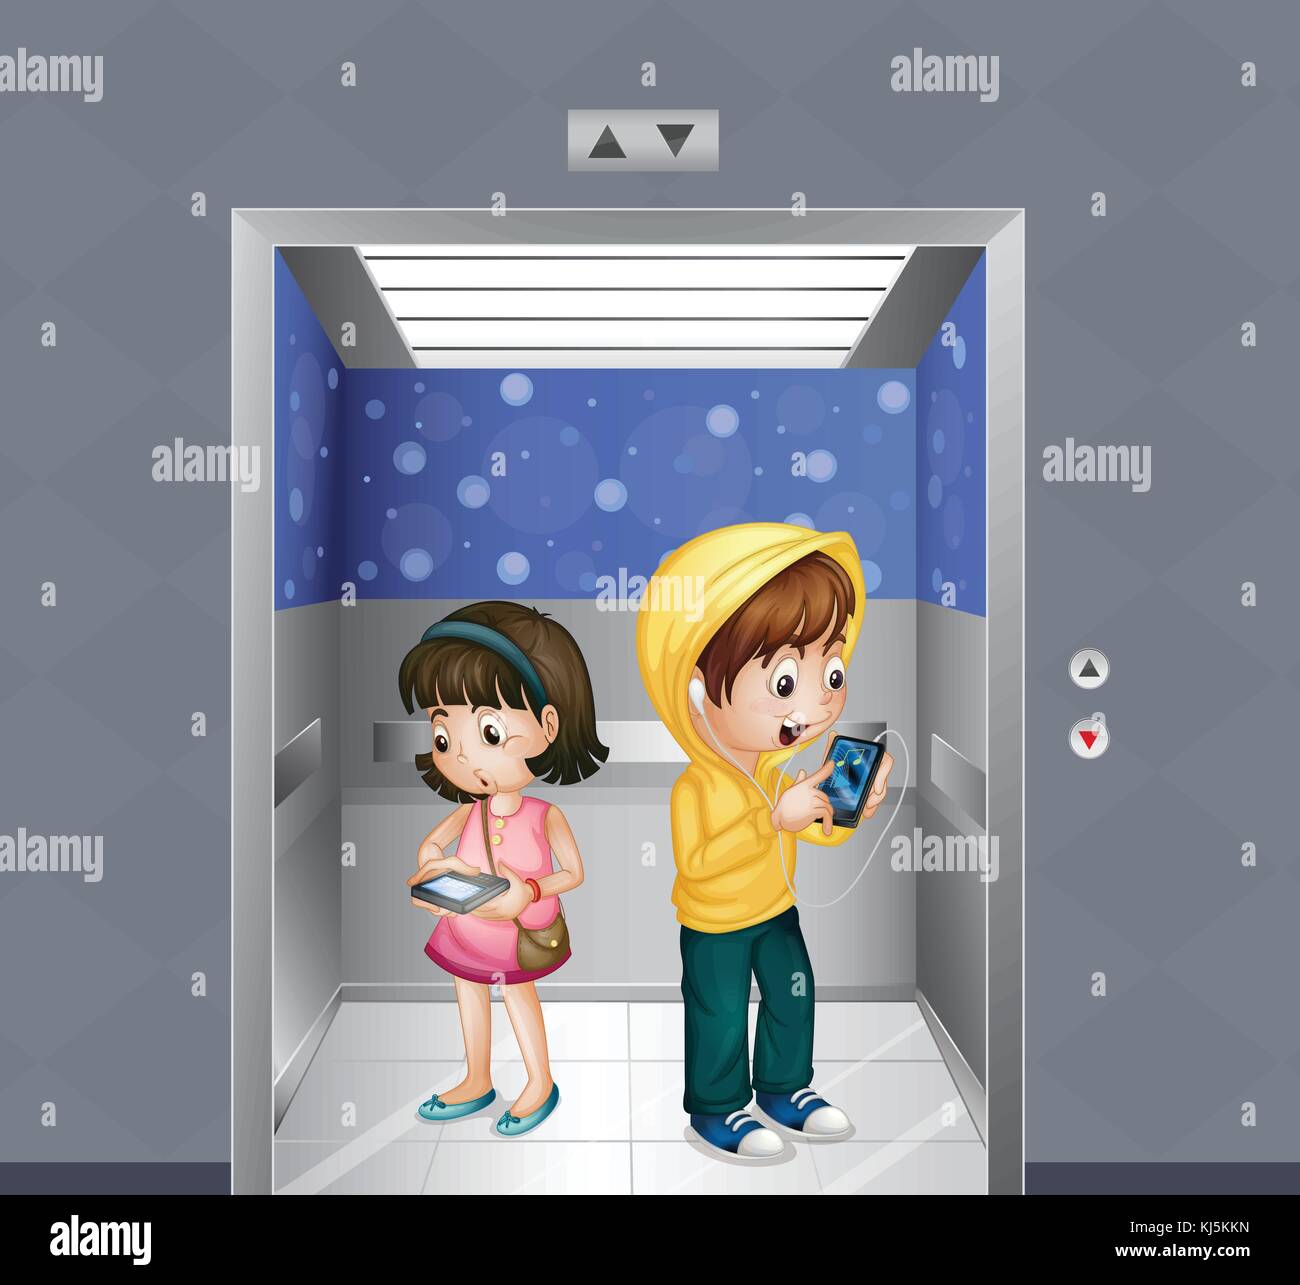 Illustration of the kids with gadgets at the elevator Stock Vector